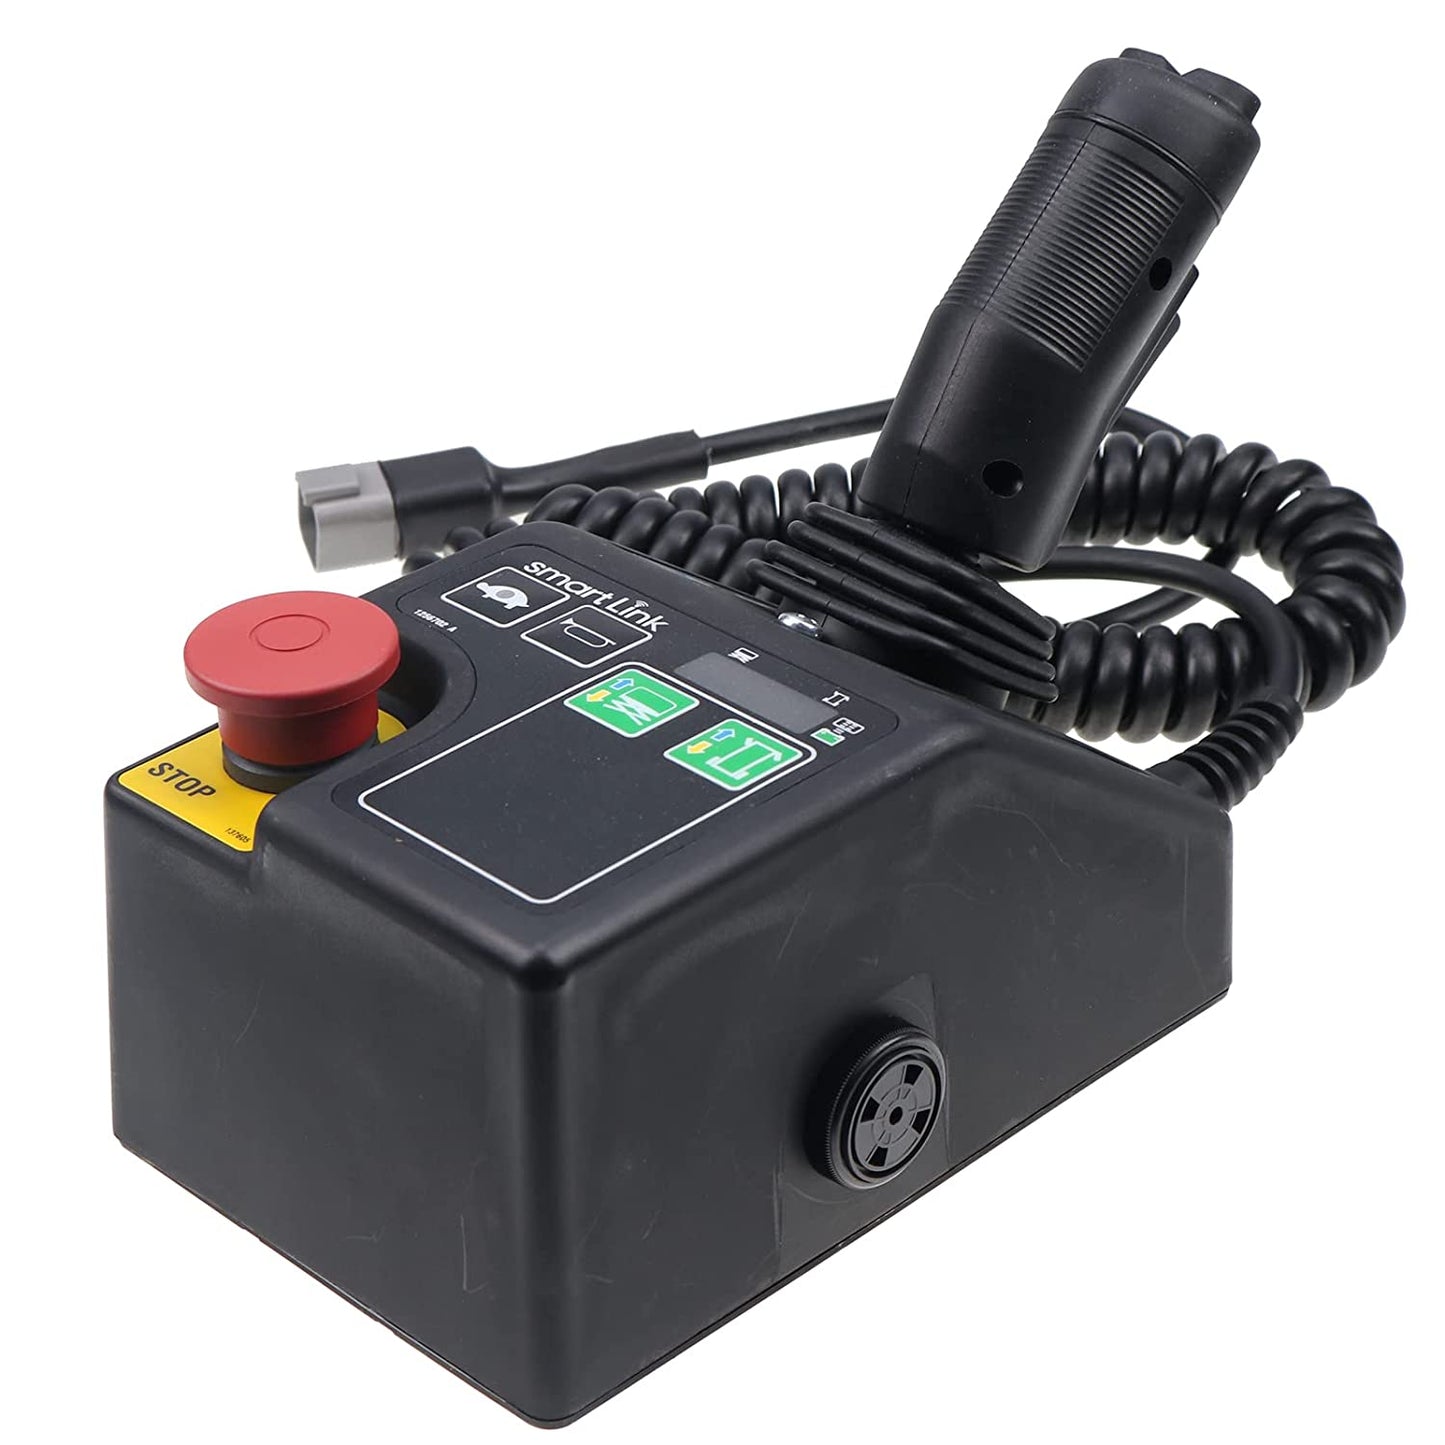 New 1256727 1256727GT Control Box Compatible with Genie Lift Gen 6 GR-12 GR-15 GR-20 GRC-12 GS-1530 GS-1532 GS-1930 GS-1932 GS-2032 GS-2046 GS-2632 GS-2646 GS-3246 GS-4047